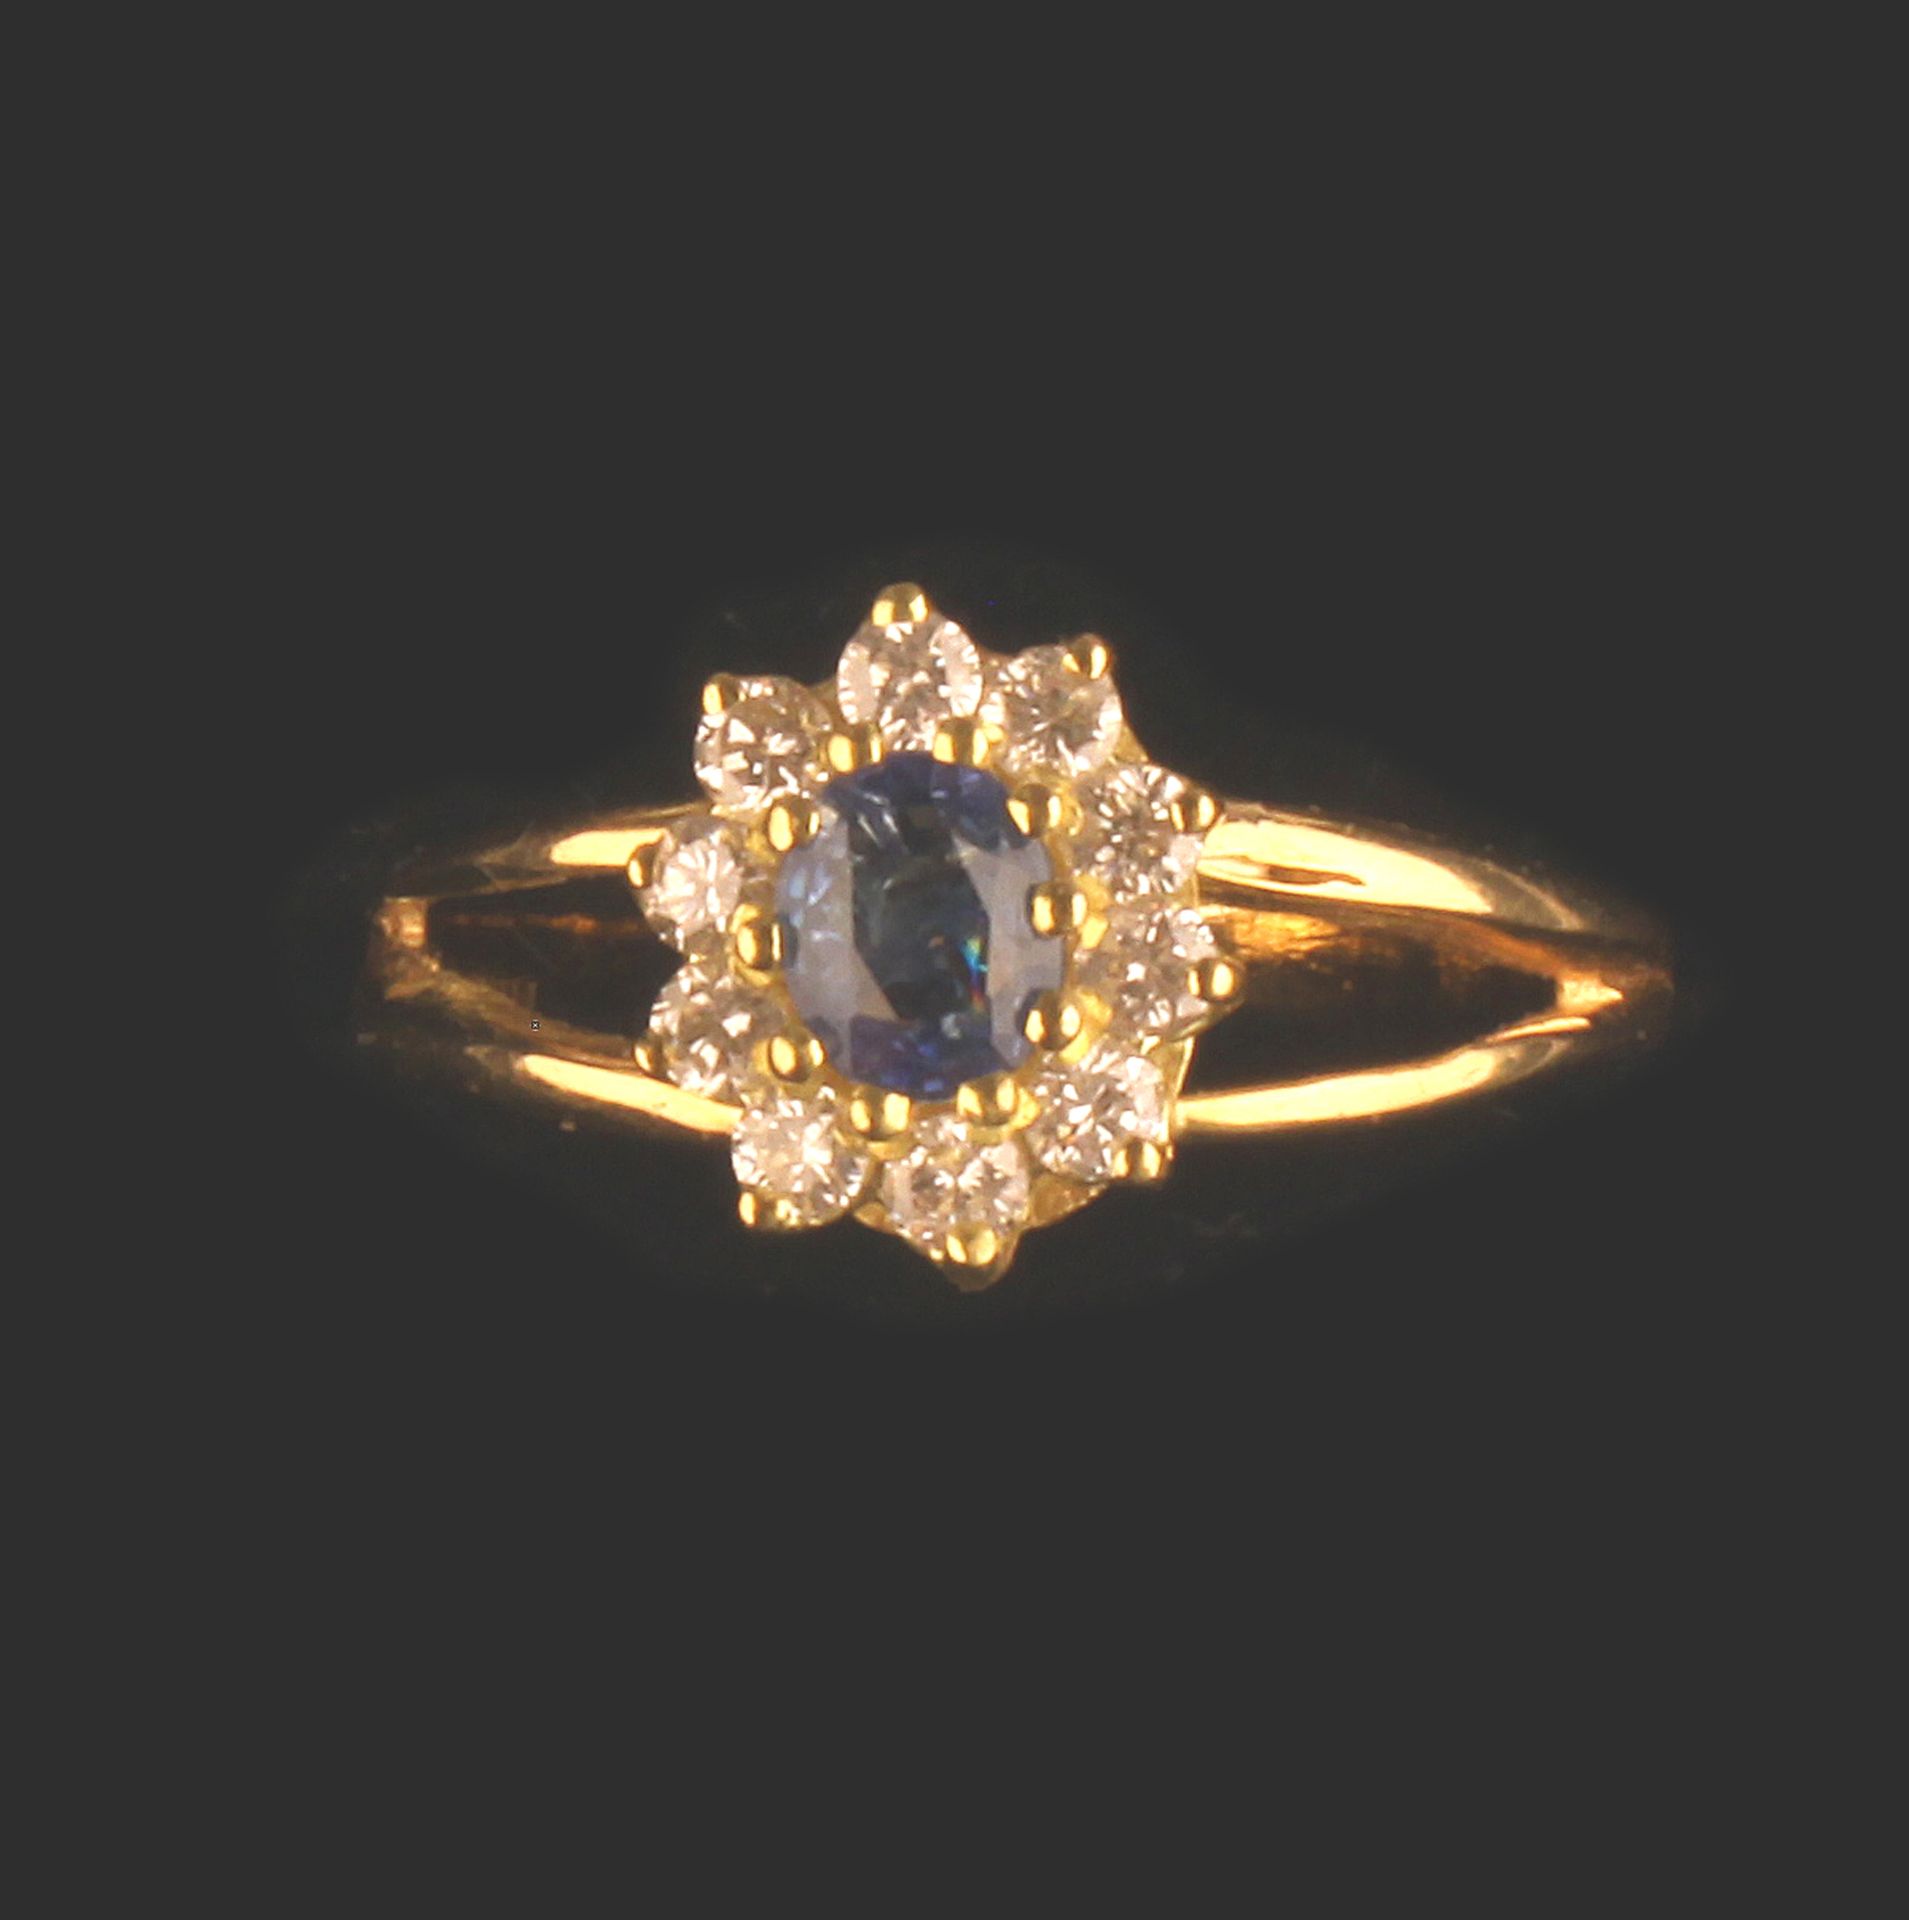 14ct GOLD RING SET WITH HIGH QUALITY SAPPHIRE SURROUNDED BY DIAMONDS - COLOUR F - VS CLARITY - Image 4 of 5